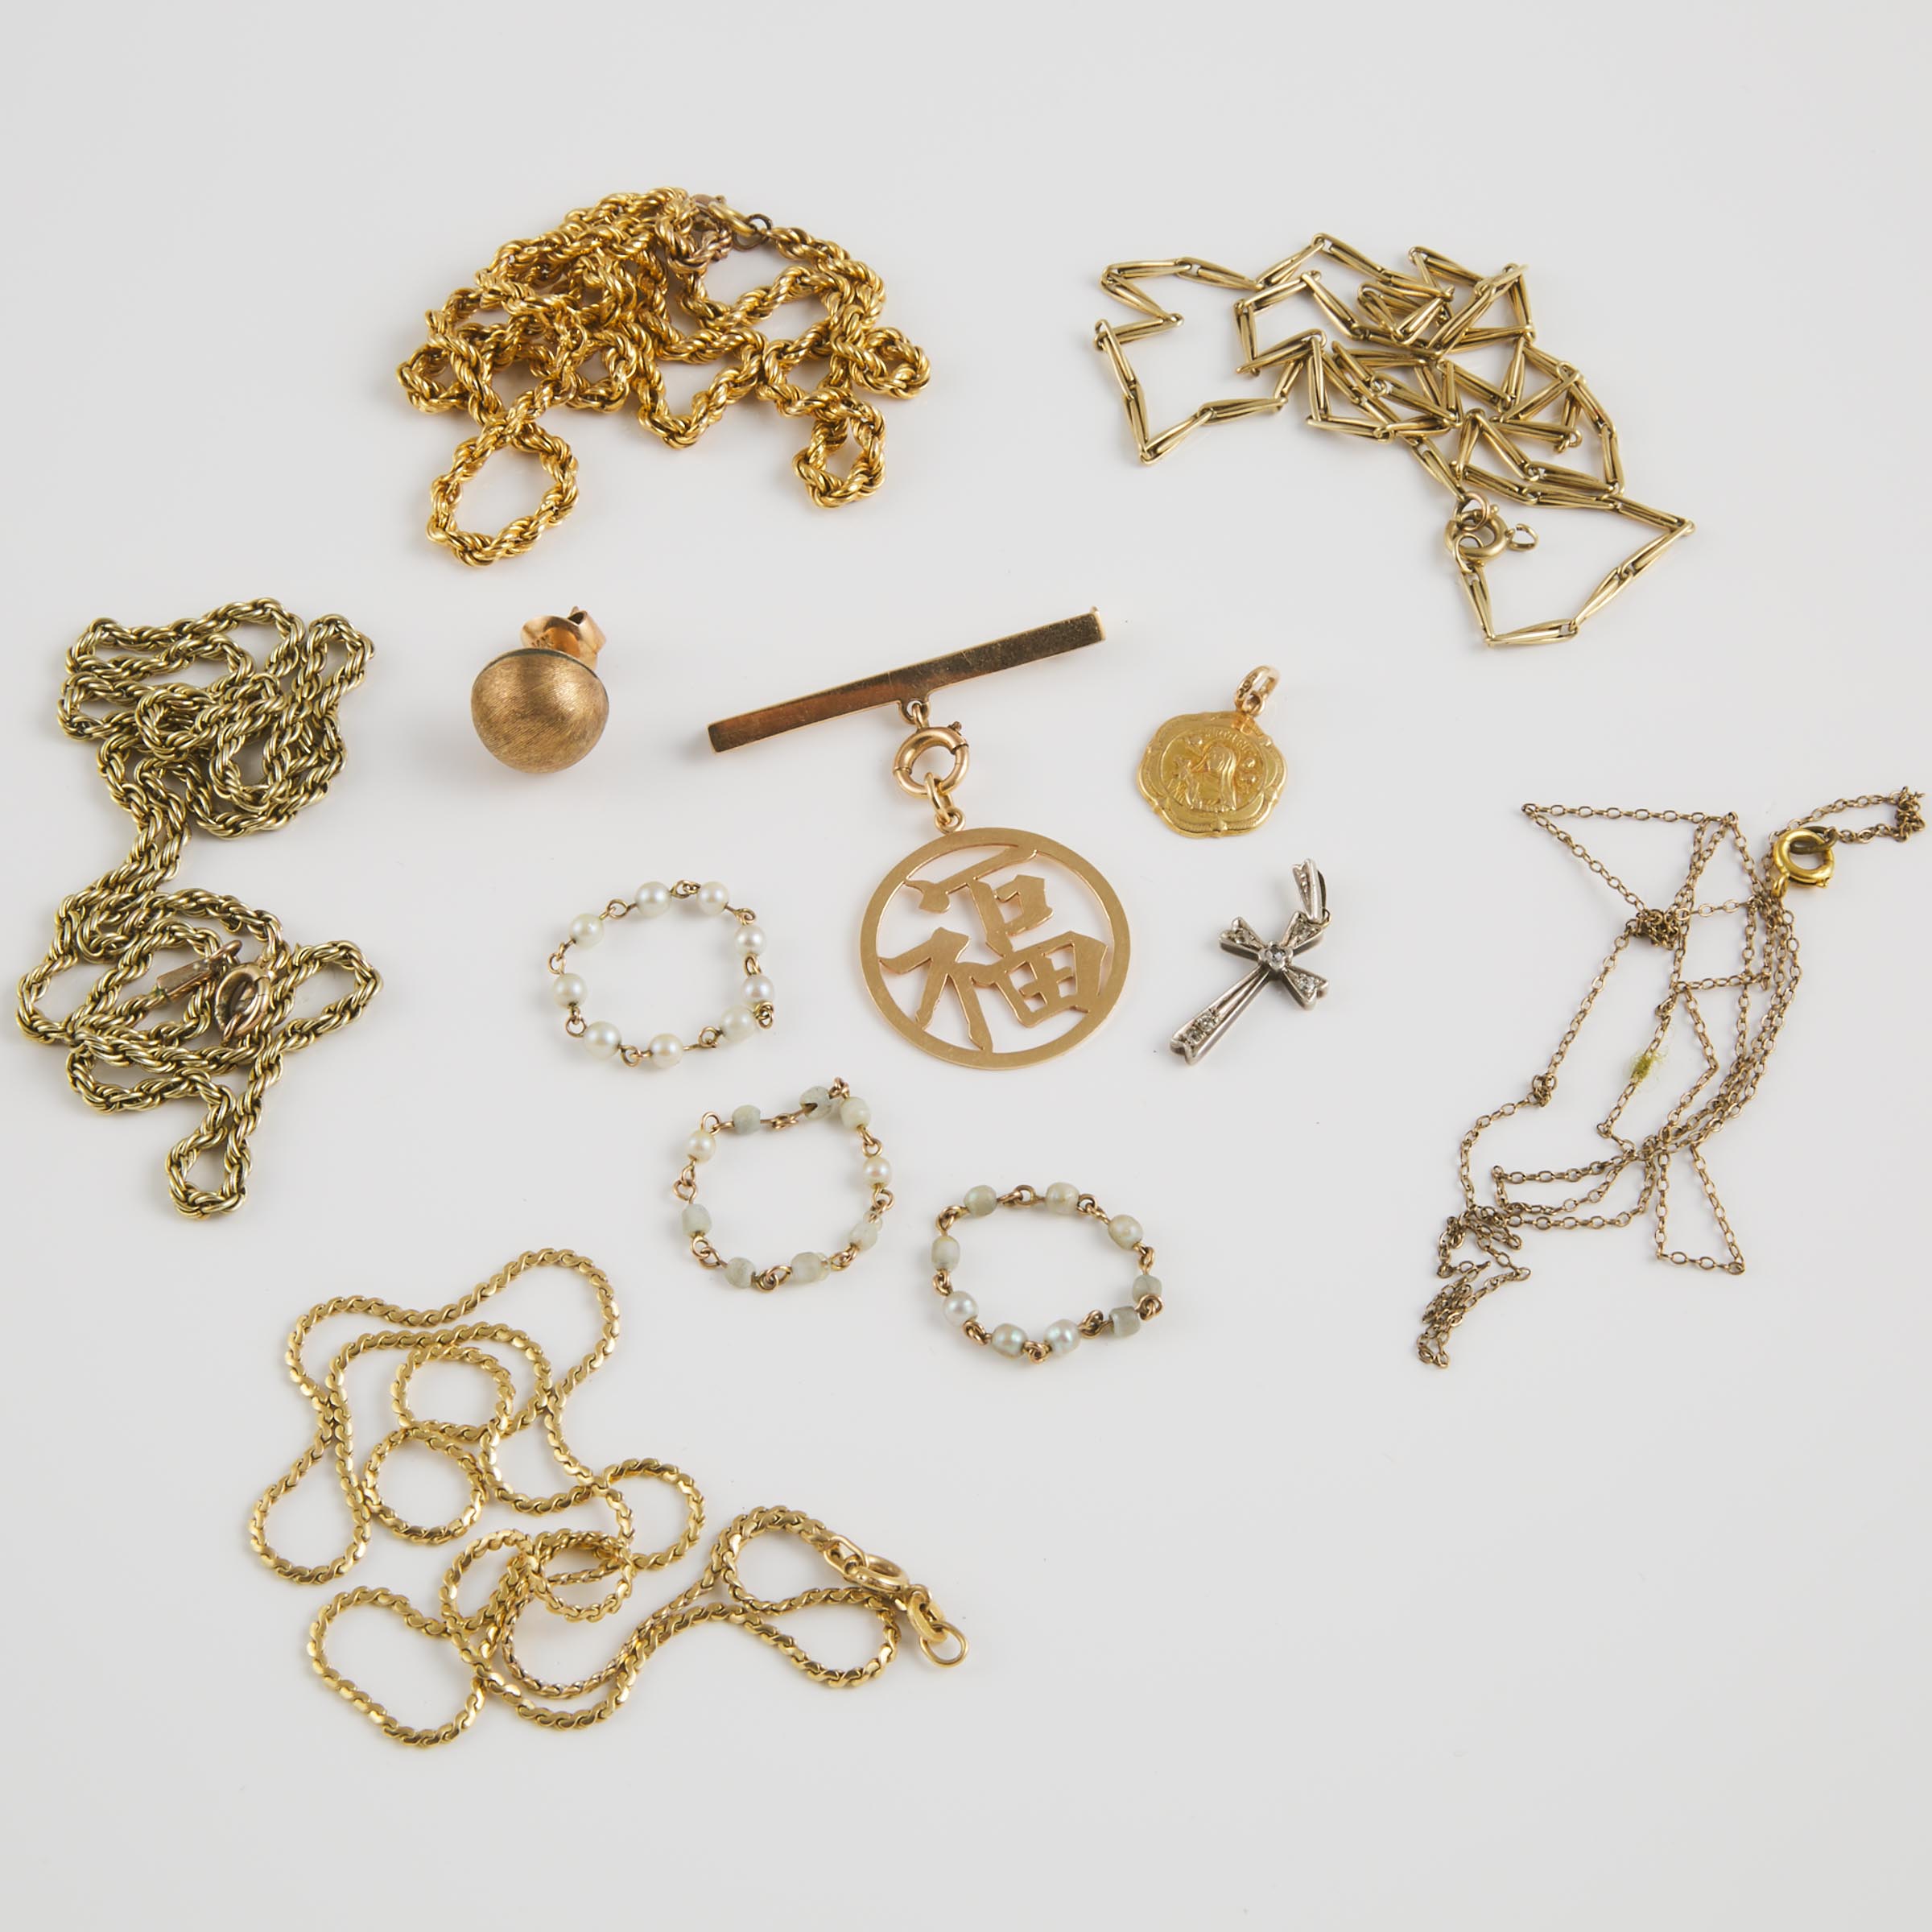 Small Quantity Of Yellow Gold Jewellery